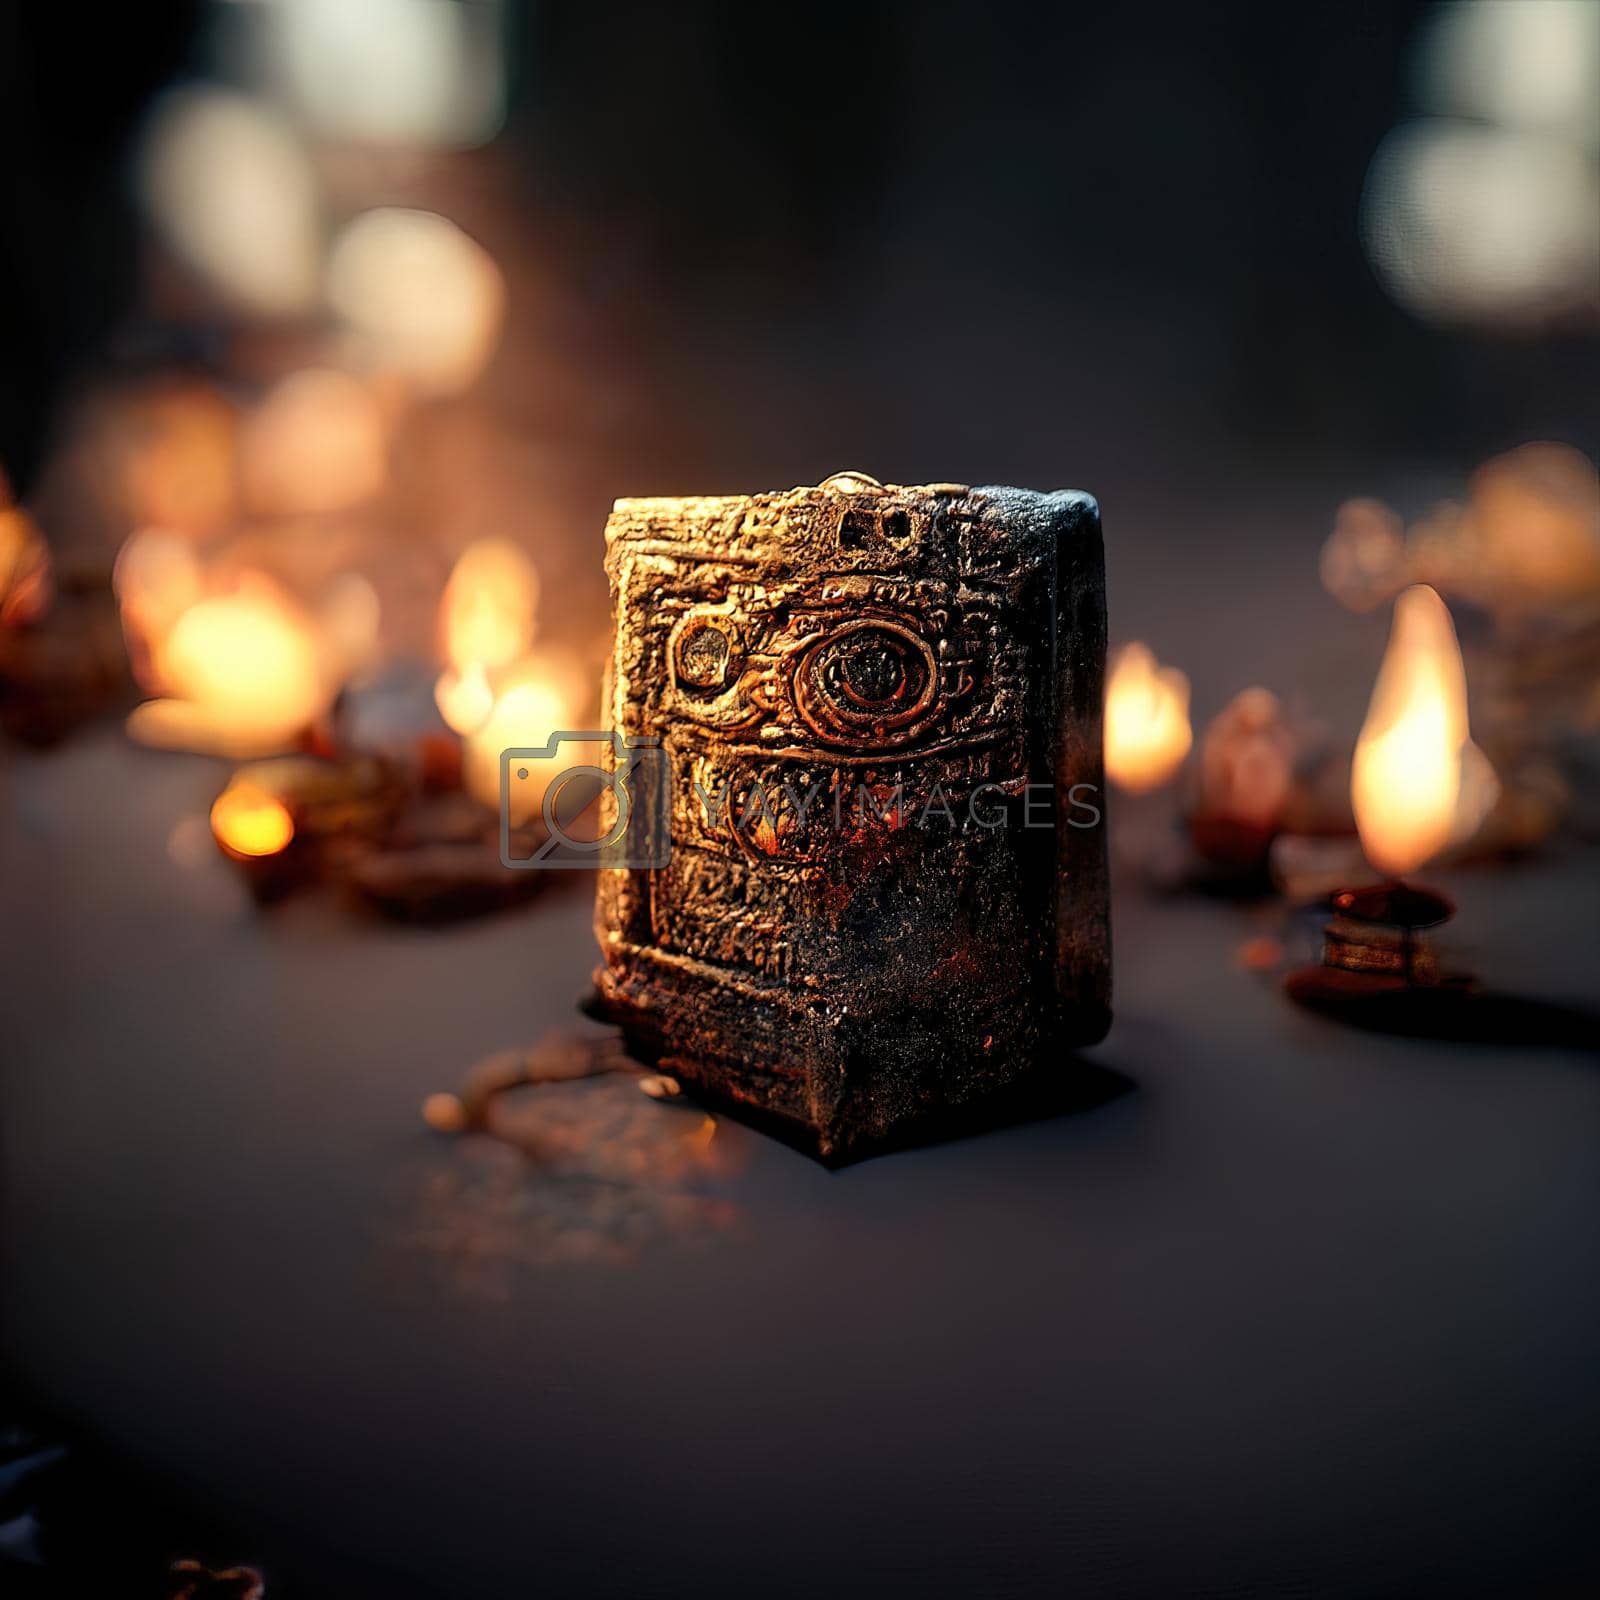 Royalty free image of Digital art of ancient god artifact, 3d illustration by Farcas